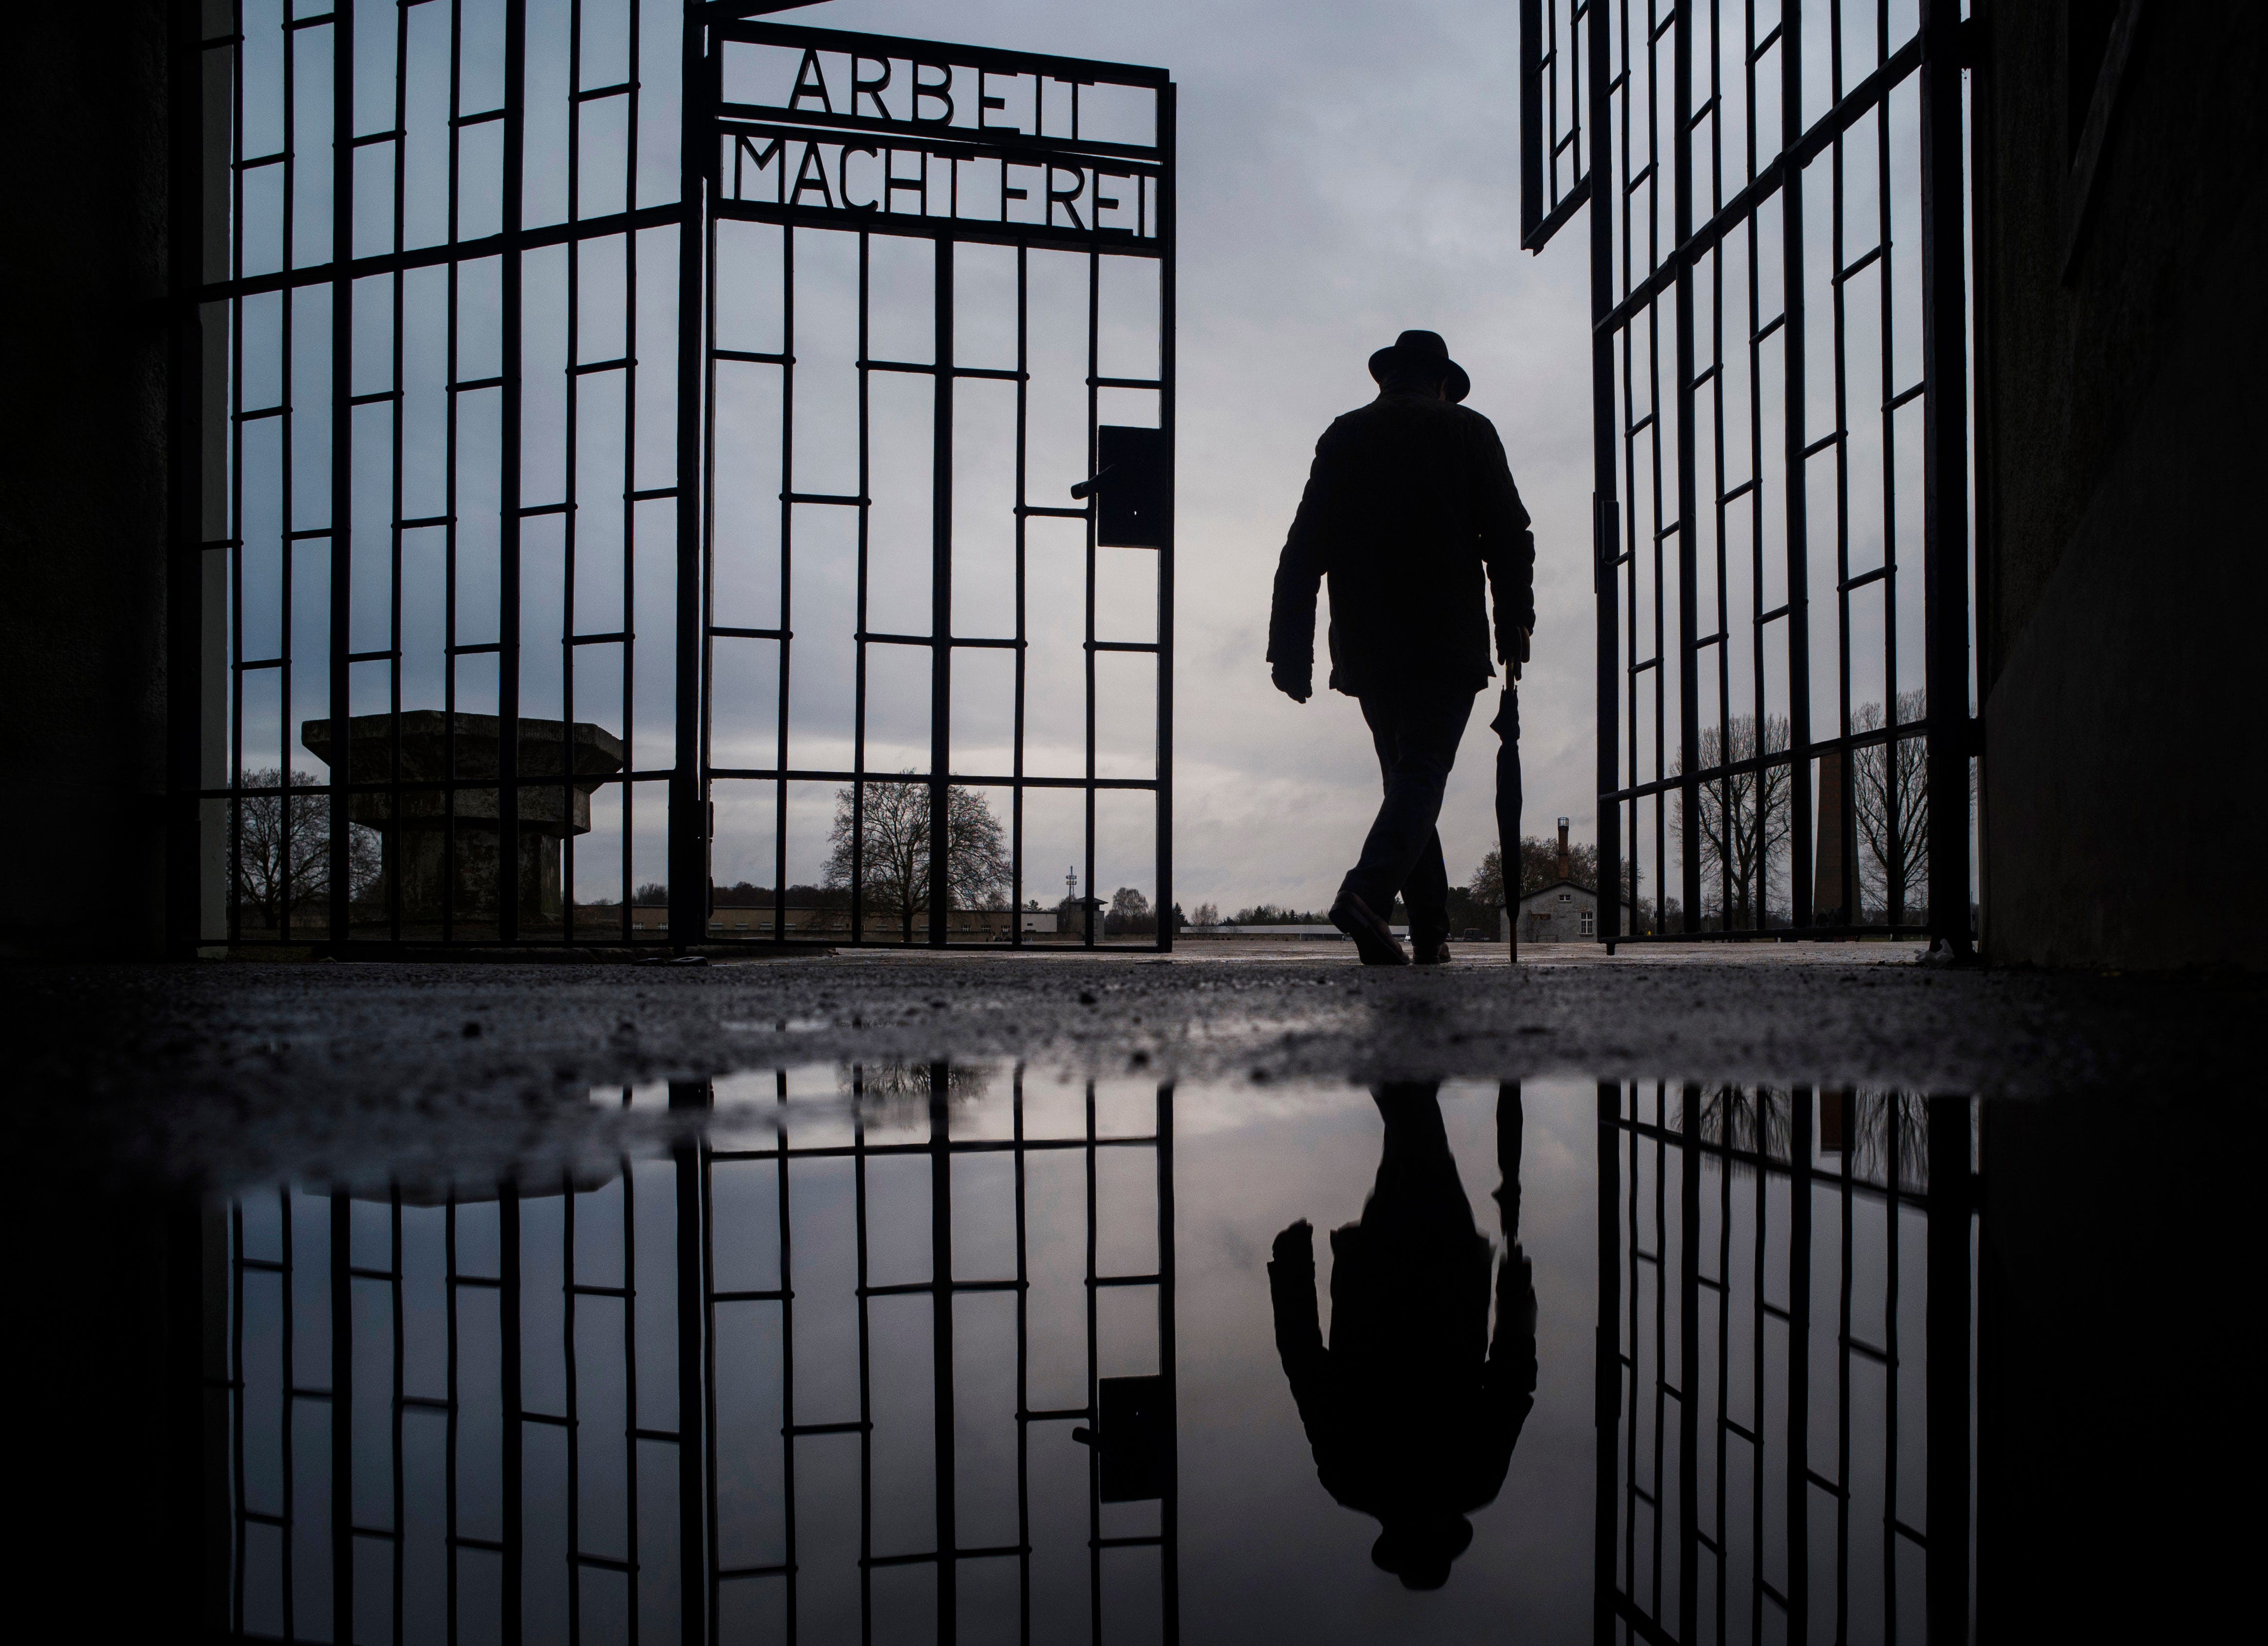 A man walks through the gate of the Sachsenhausen Nazi death camp with the phrase "Arbeit macht frei" (work sets you free) in Oranienburg, Germany, on International Holocaust Remembrance Day, Jan. 27, 2019.